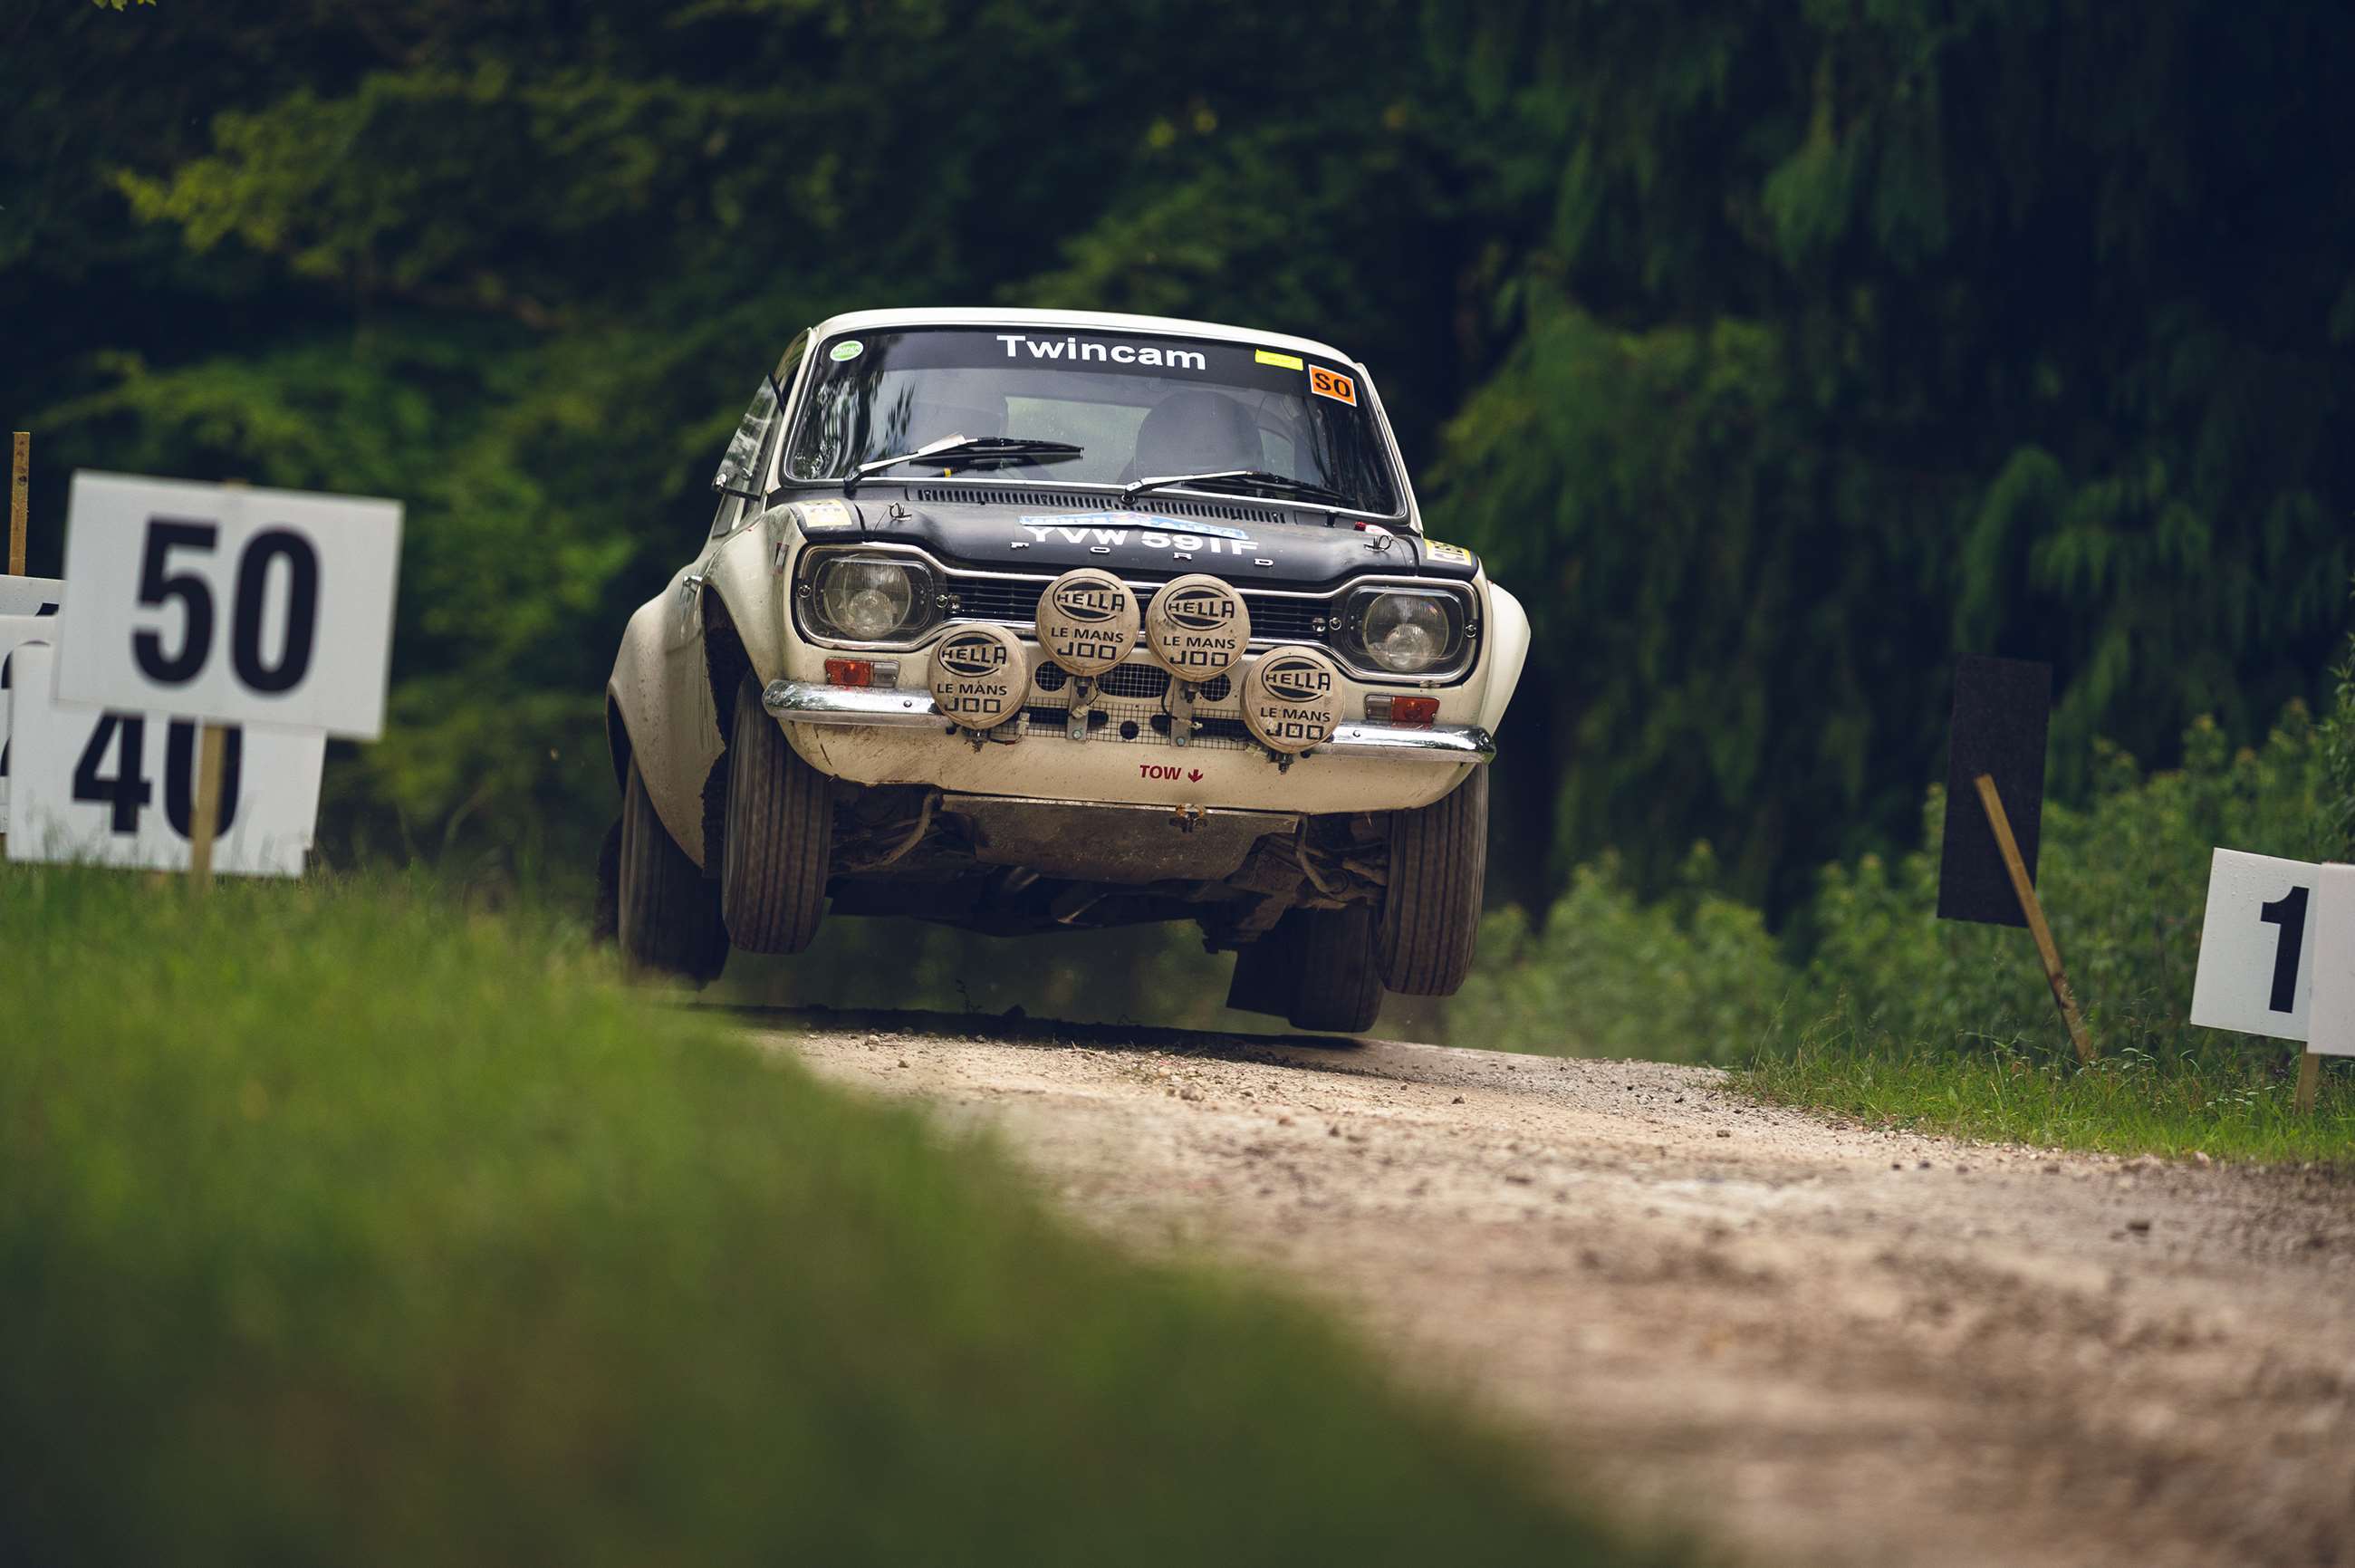 shootout-sunday-festival-of-speed-2020-rally-stage-ford-escort-fos-2019-jordan-butters-goodwood-06012020.jpg